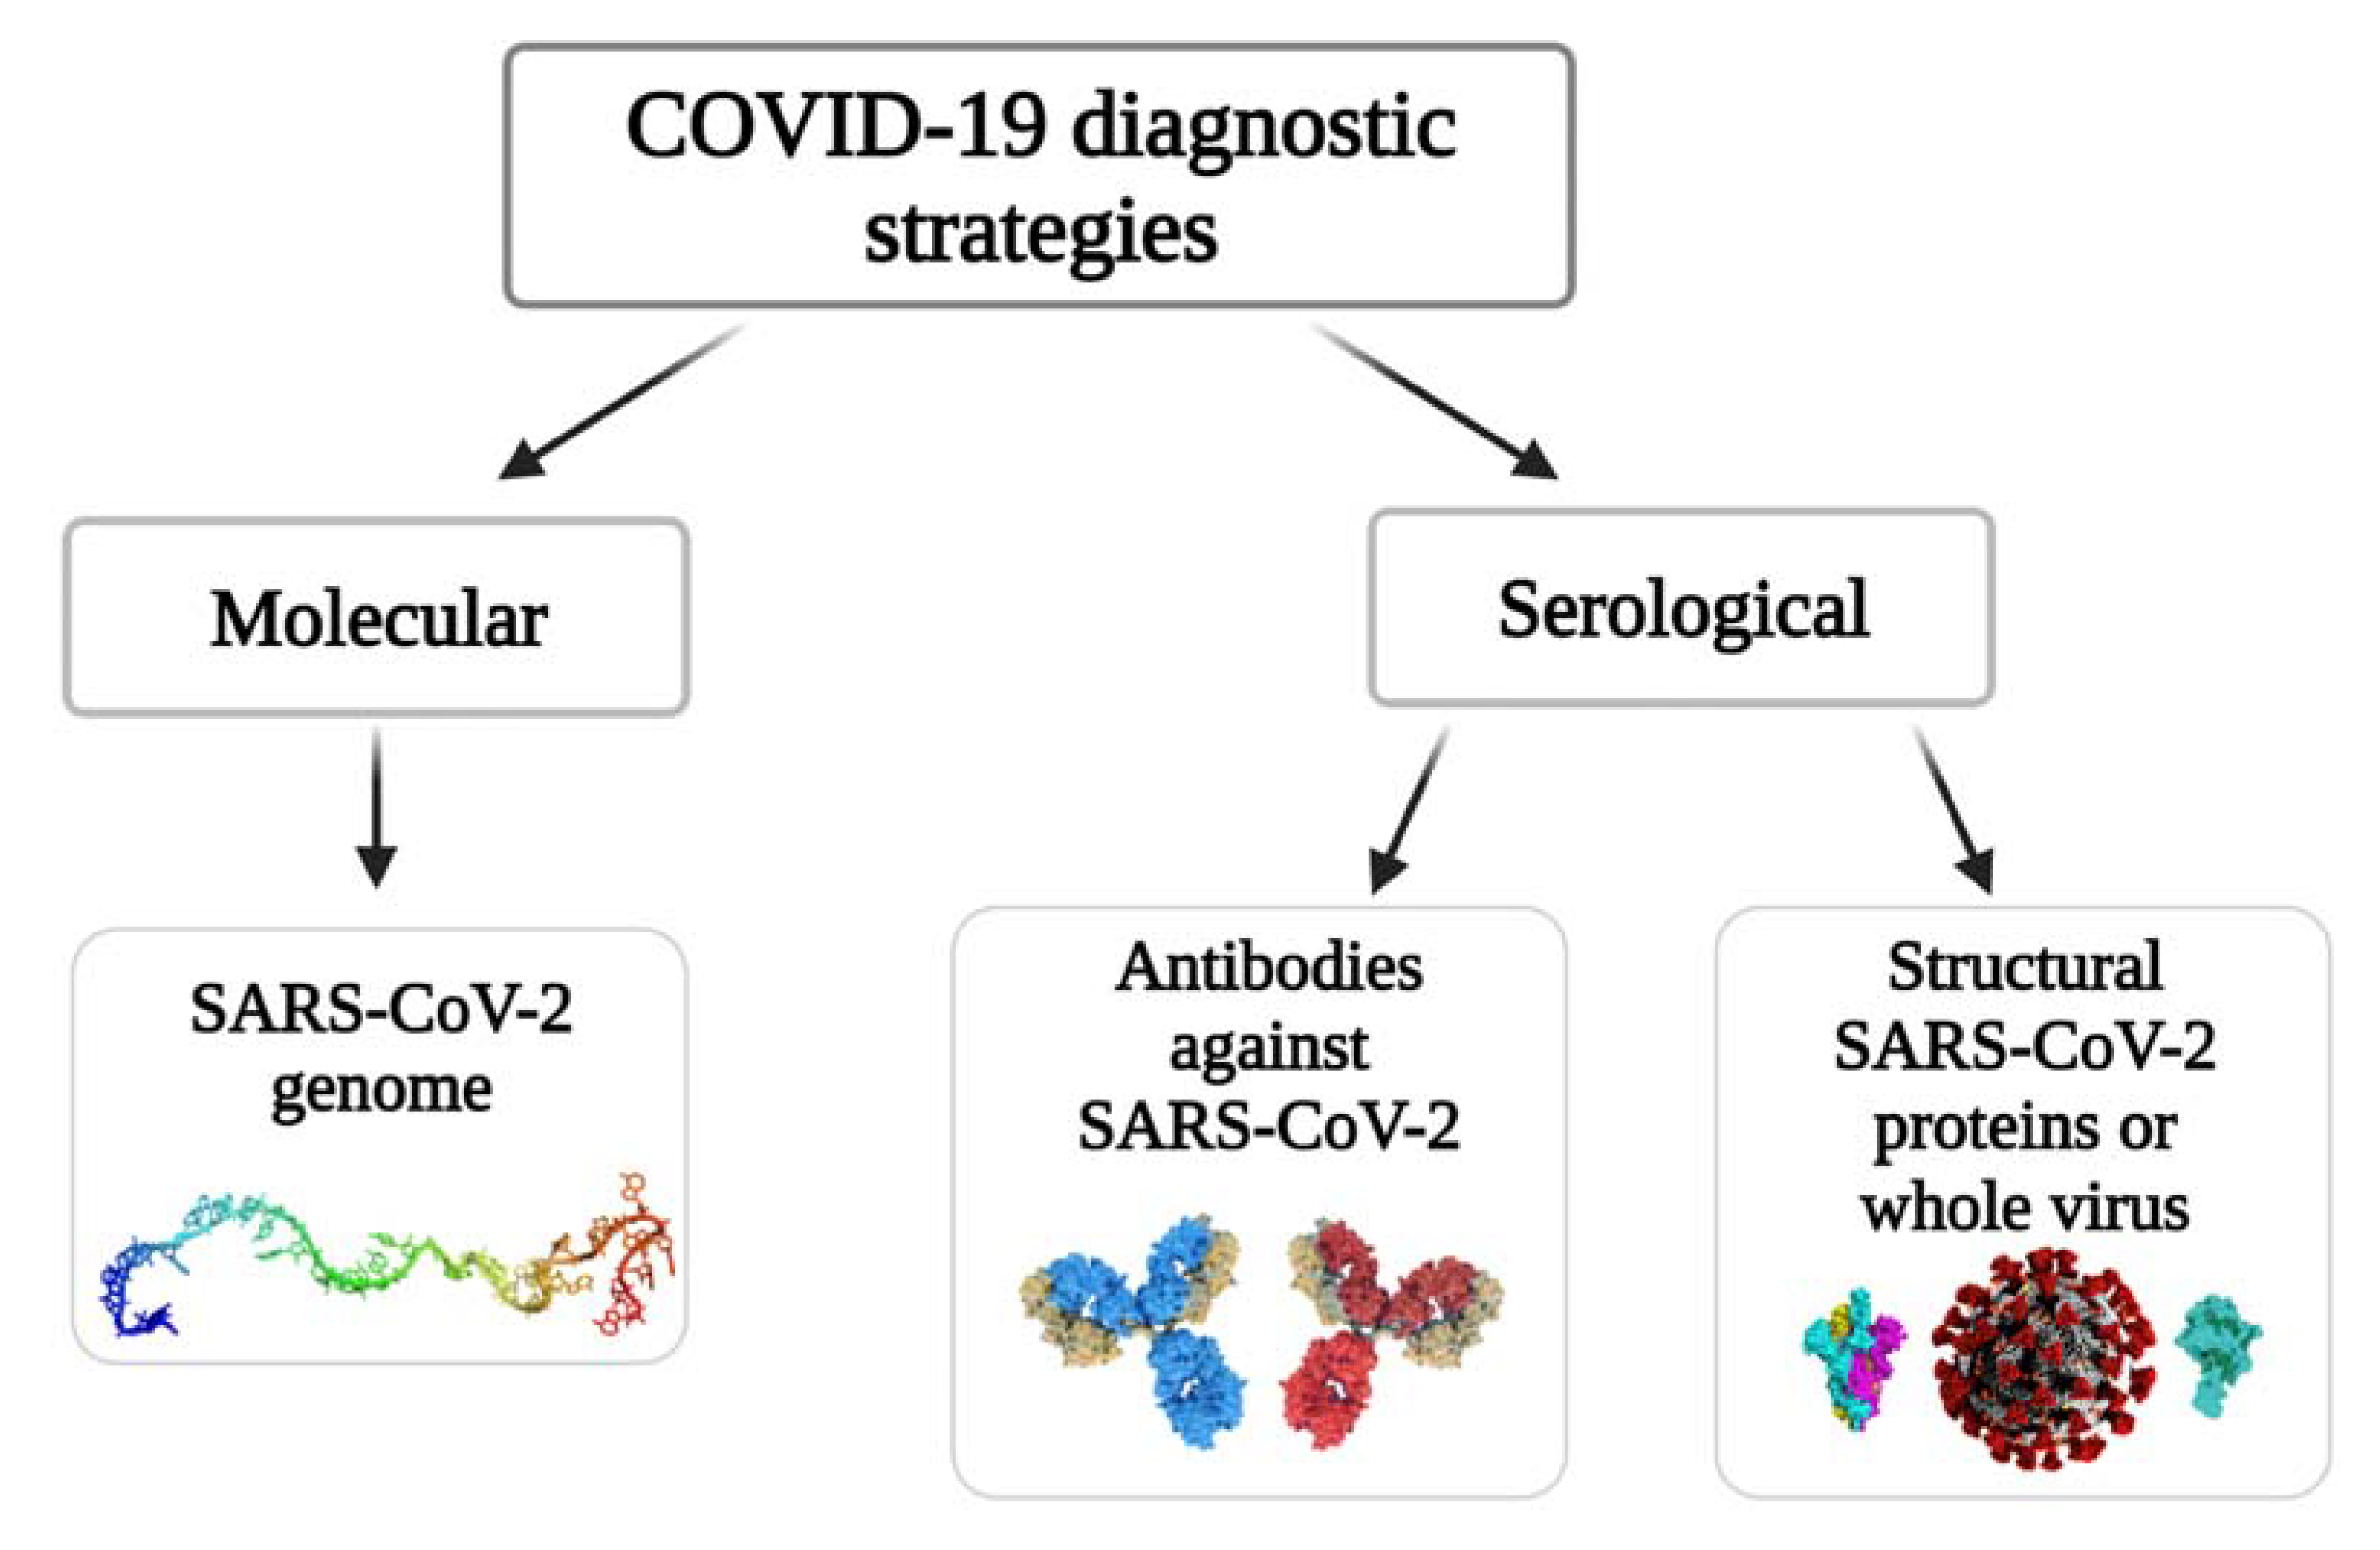 How Dippin' Dots could help with COVID-19 vaccine storage